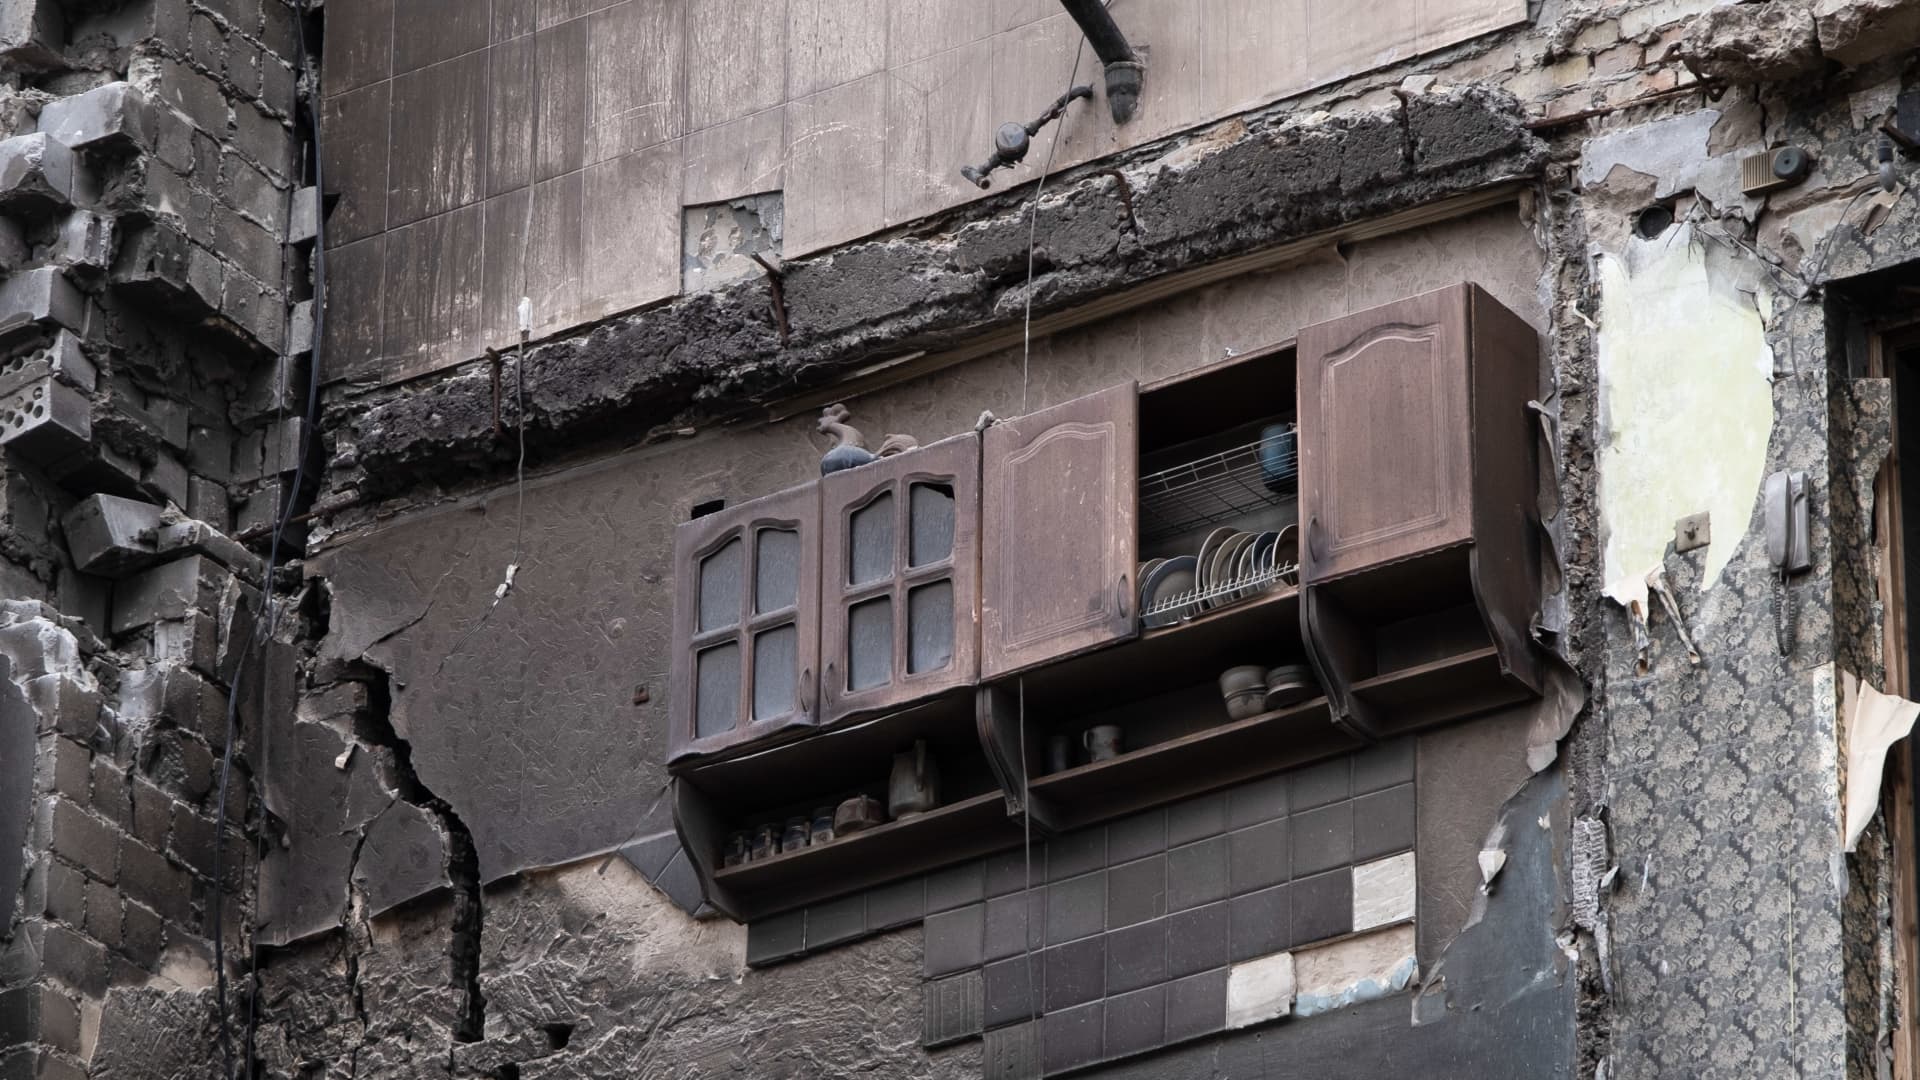 This image of kitchen cupboards still attached to a wall in a destroyed residential building in Borodyanka, Kyiv Oblast, went viral, symbolizing Ukraine's resilience in the face of Russia's invasion.